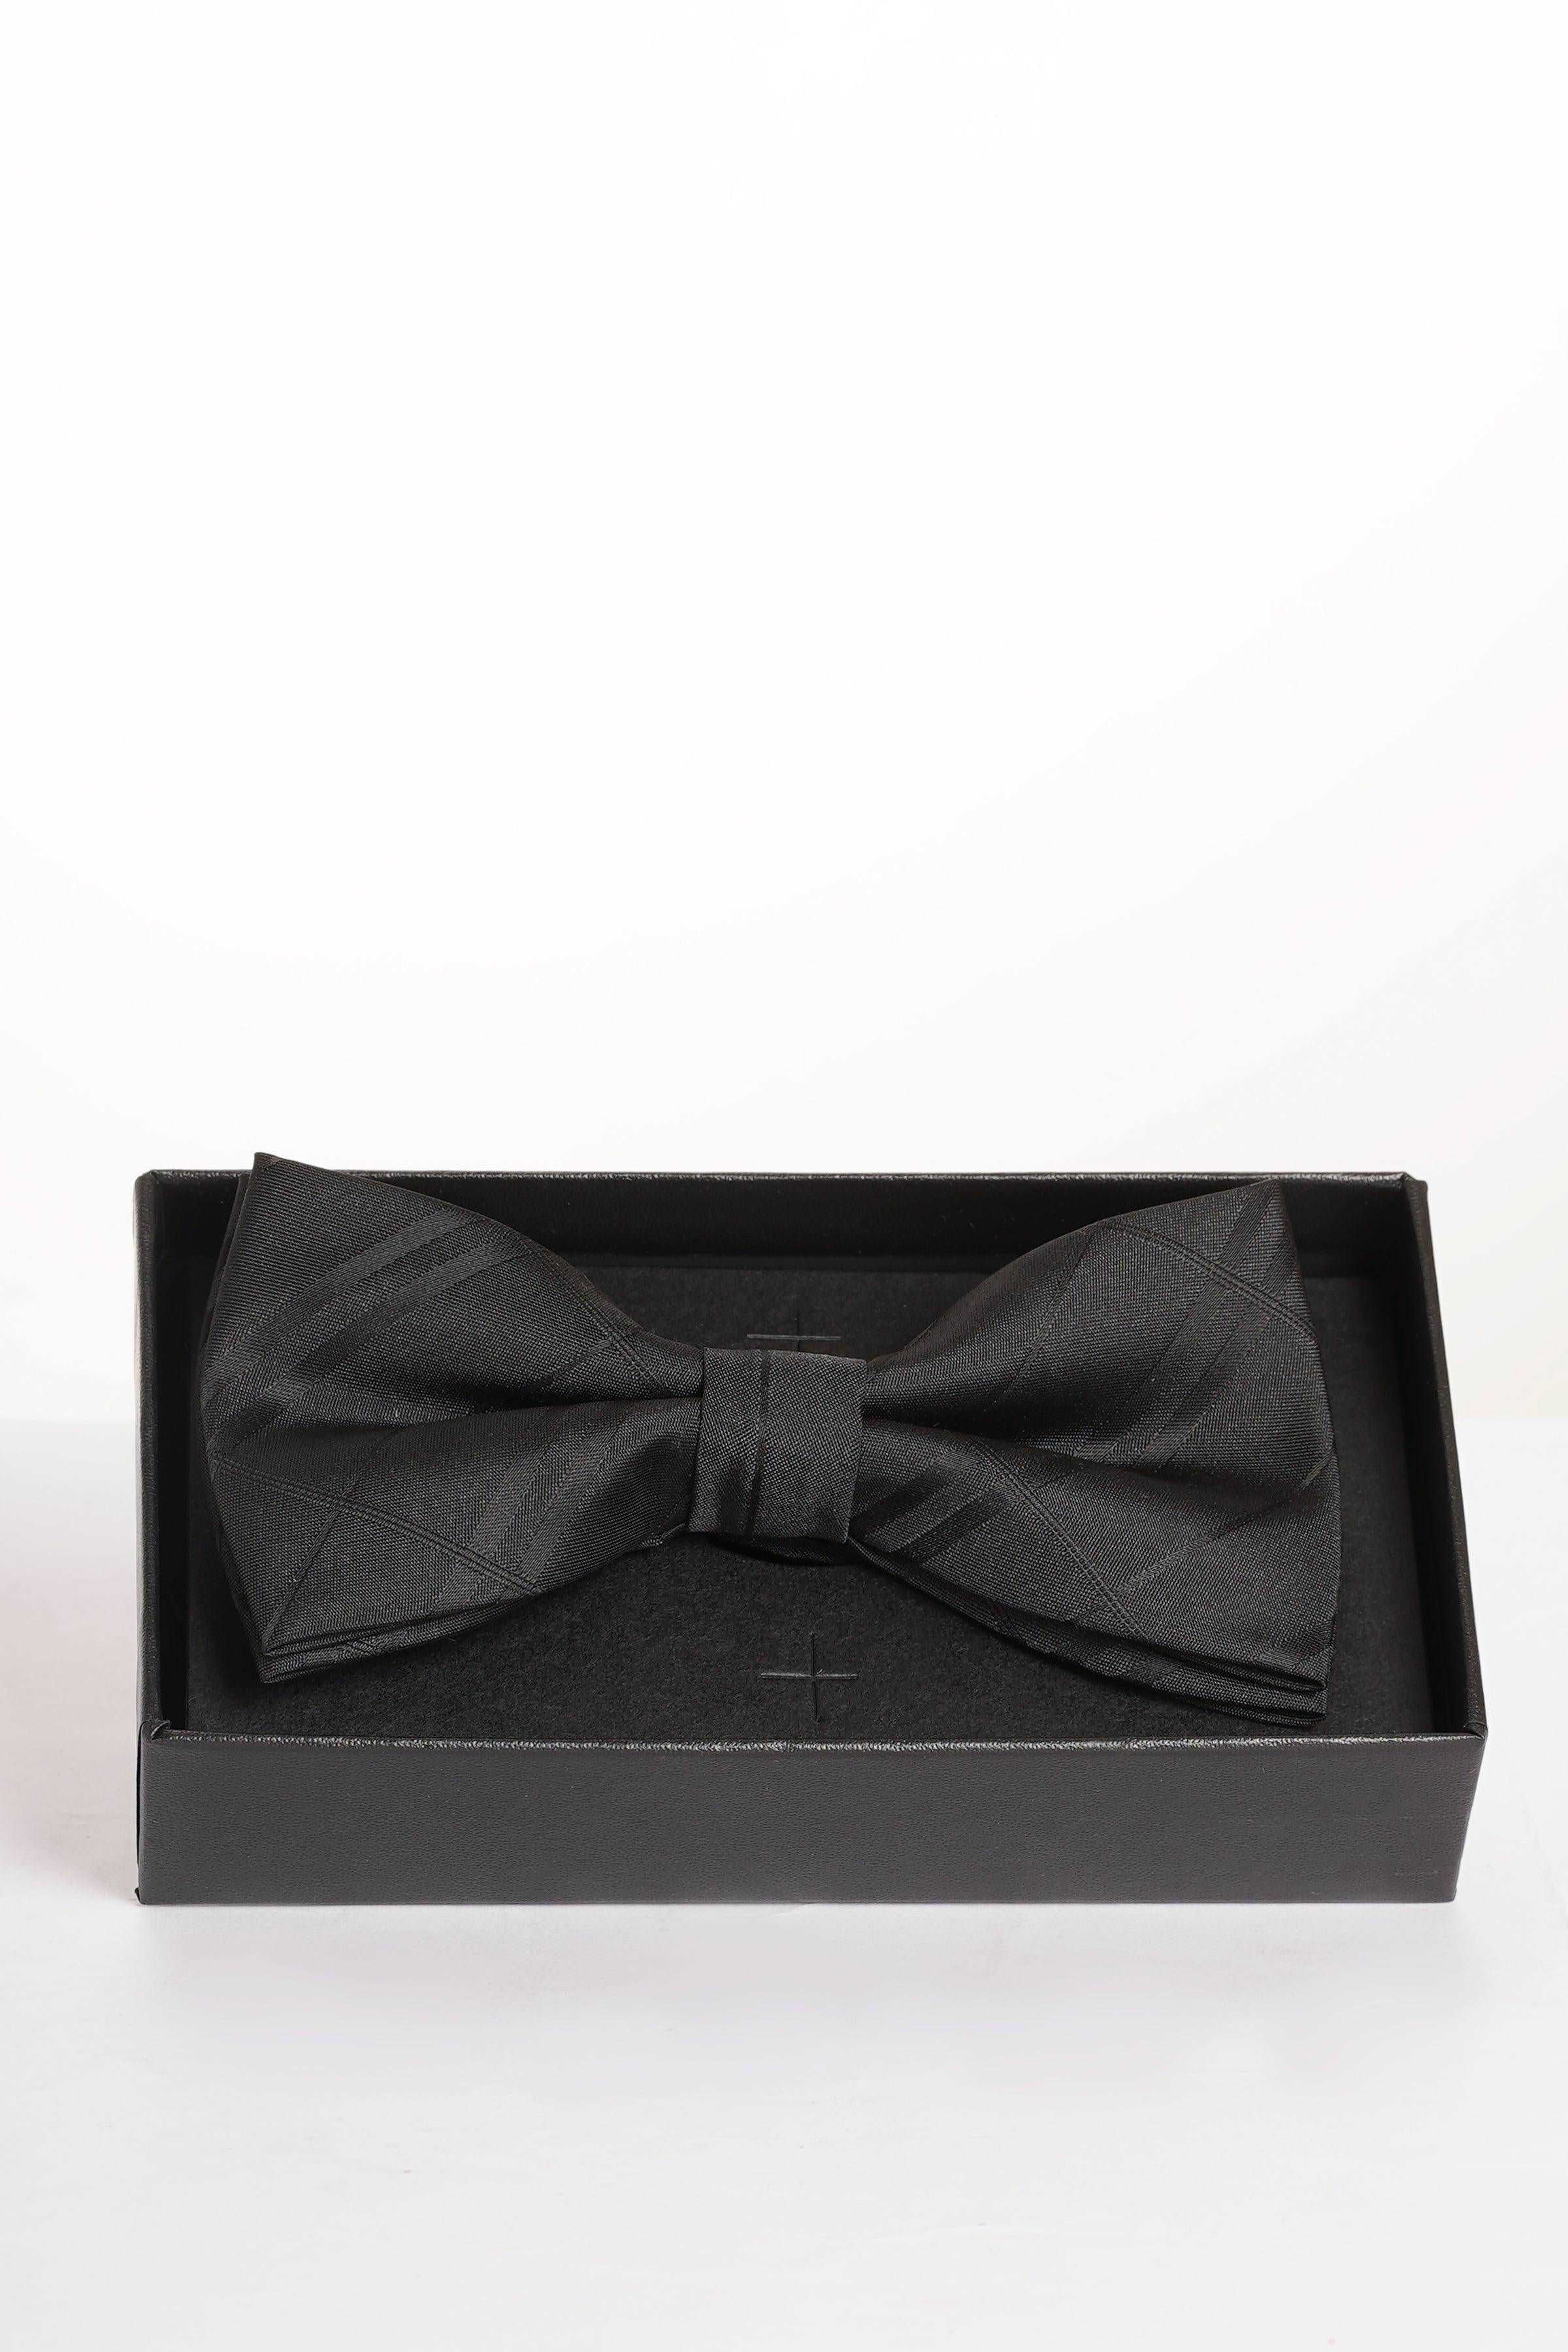 BOW TIE at Charcoal Clothing